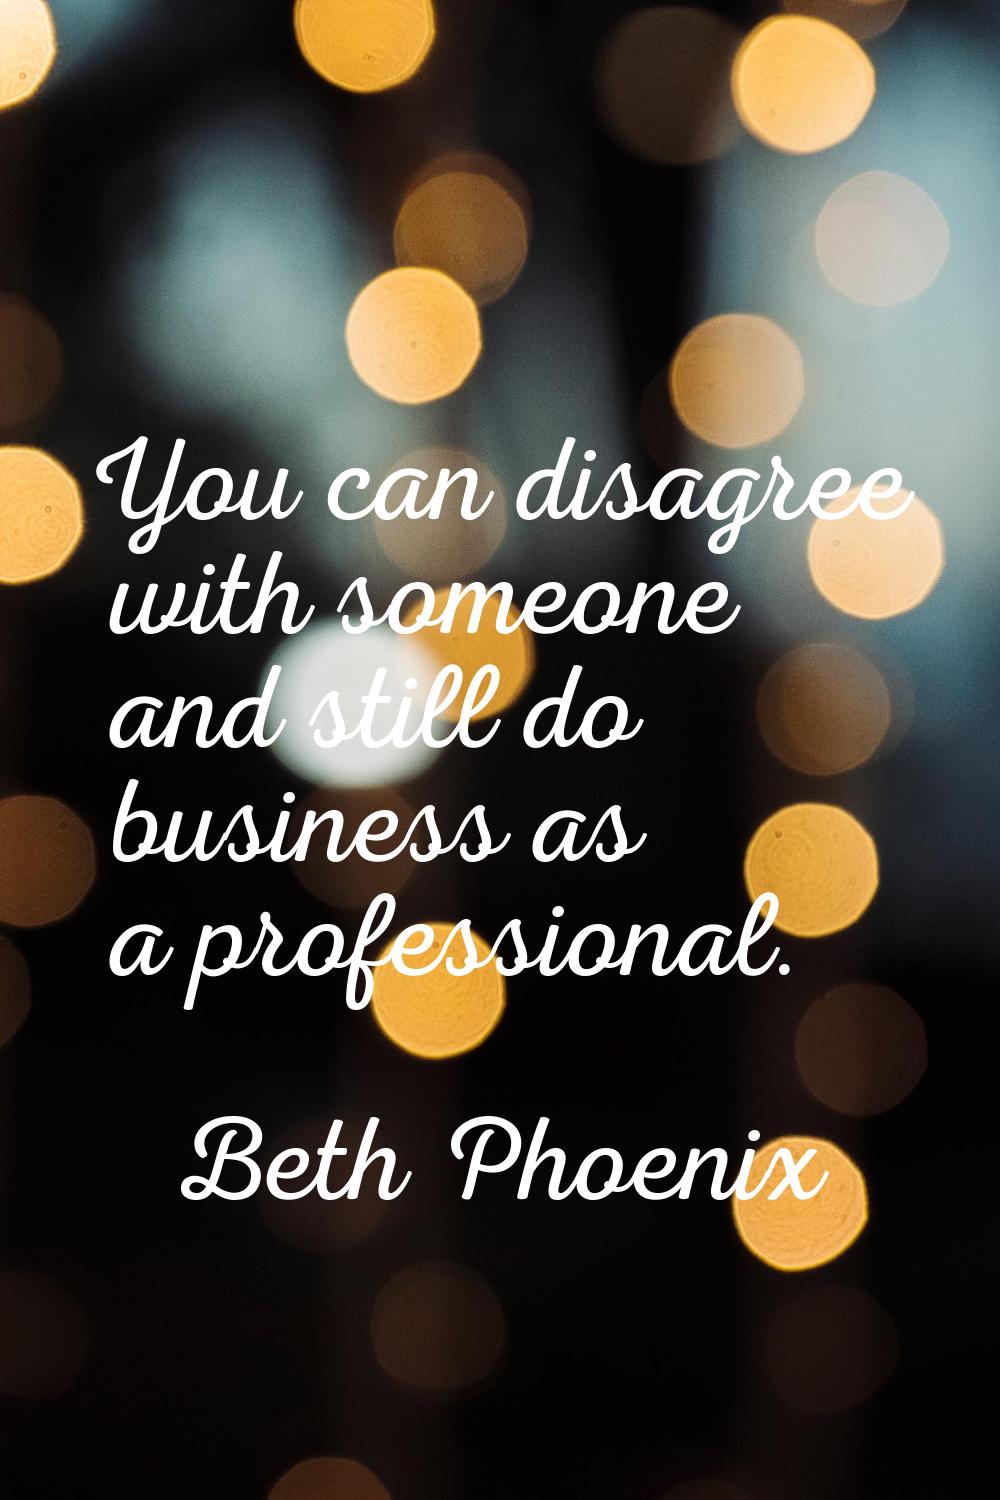 You can disagree with someone and still do business as a professional.